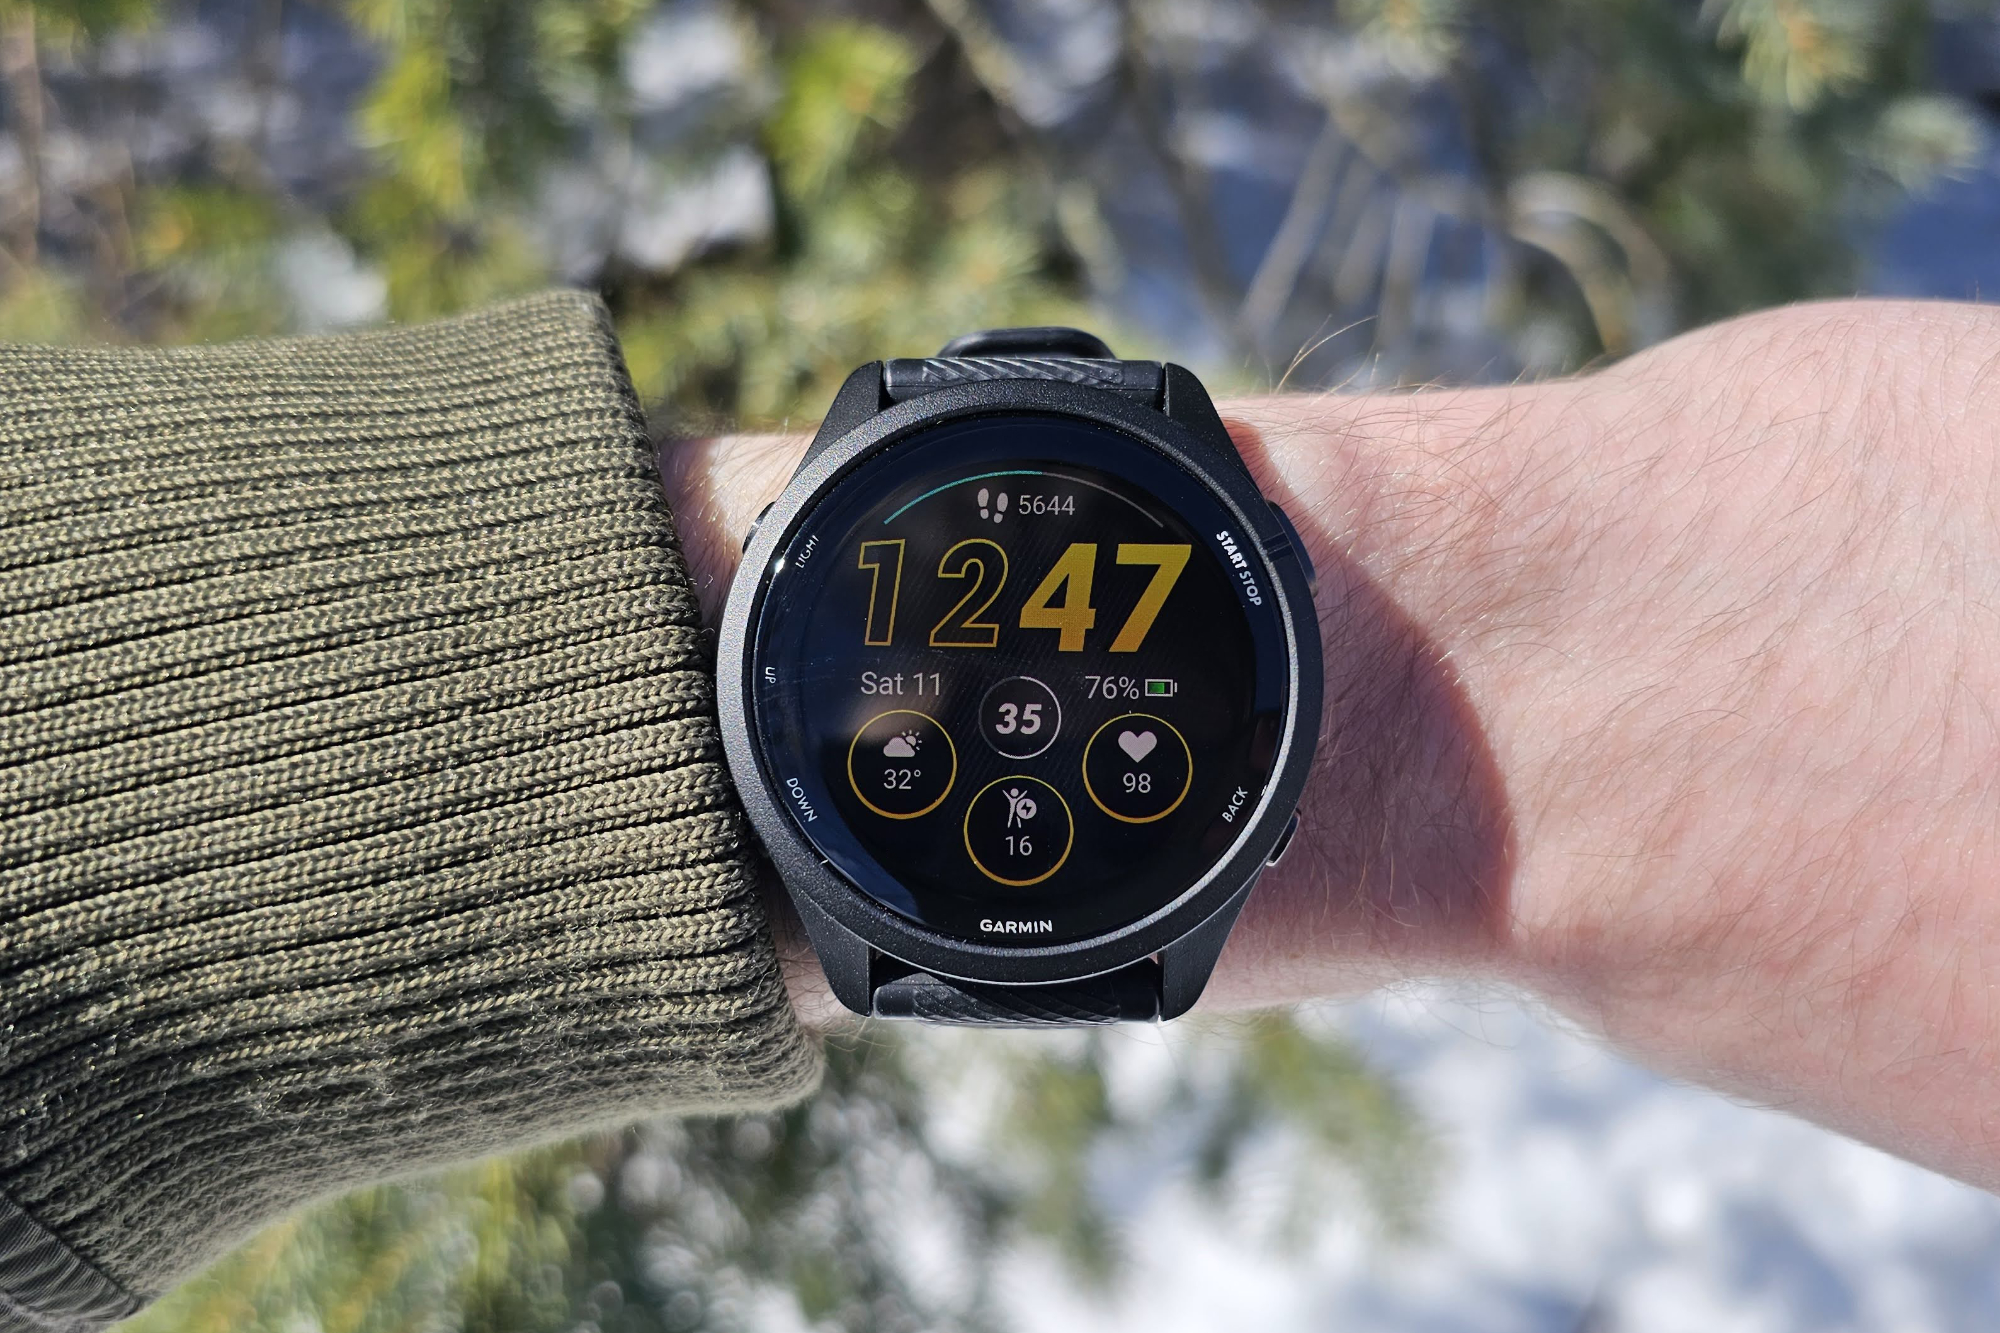 Garmin Forerunner 265 review: a new for fitness watches | Digital Trends